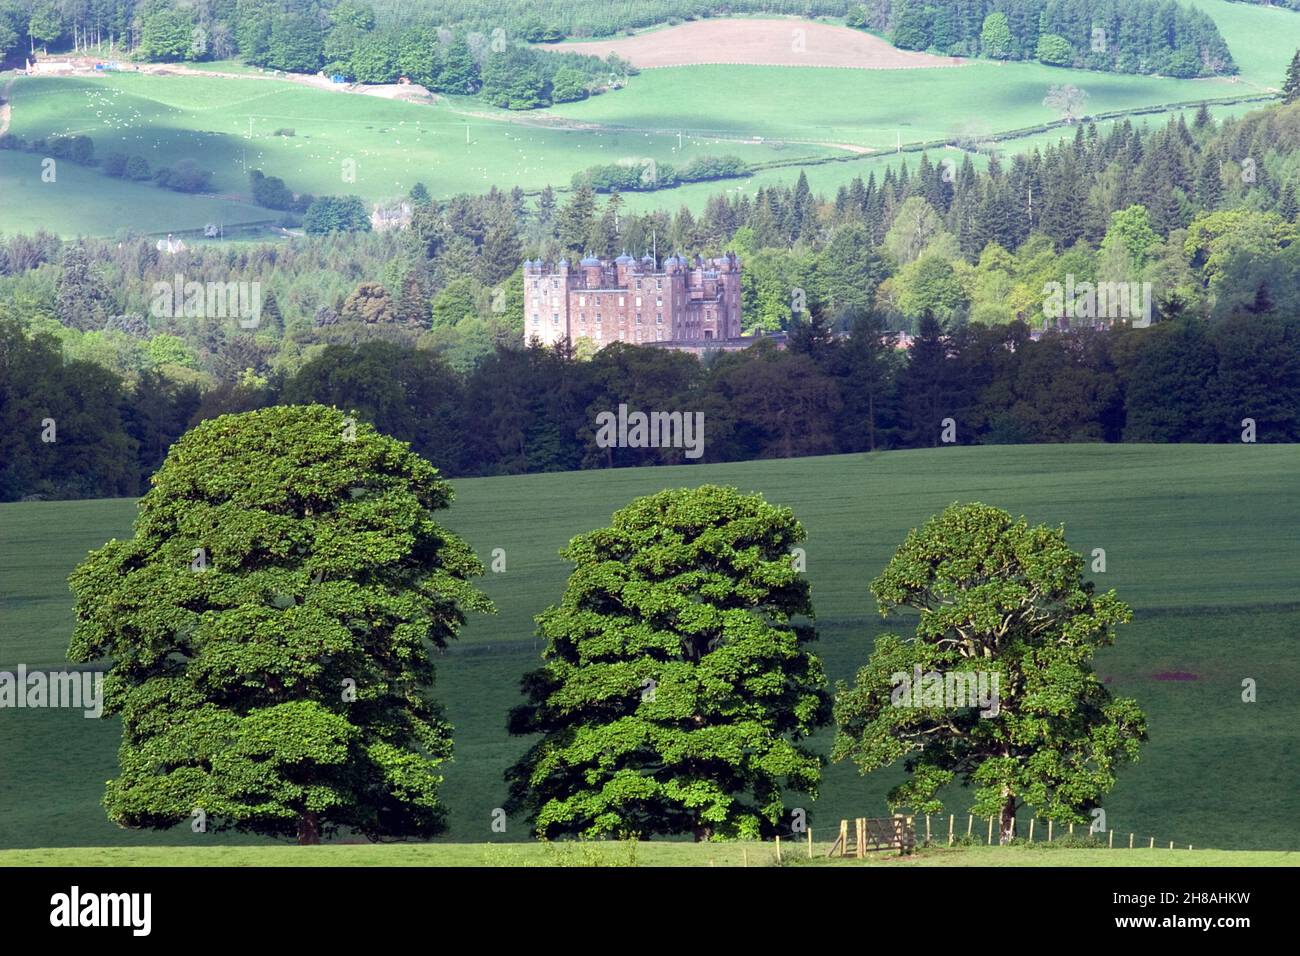 Drumlanrig Castle home to the DUke and Duchess of Buccleuch & Queensberry, Queensbury estate, Dumfries & Galloway, Dumfriesshire, Scotland Stock Photo